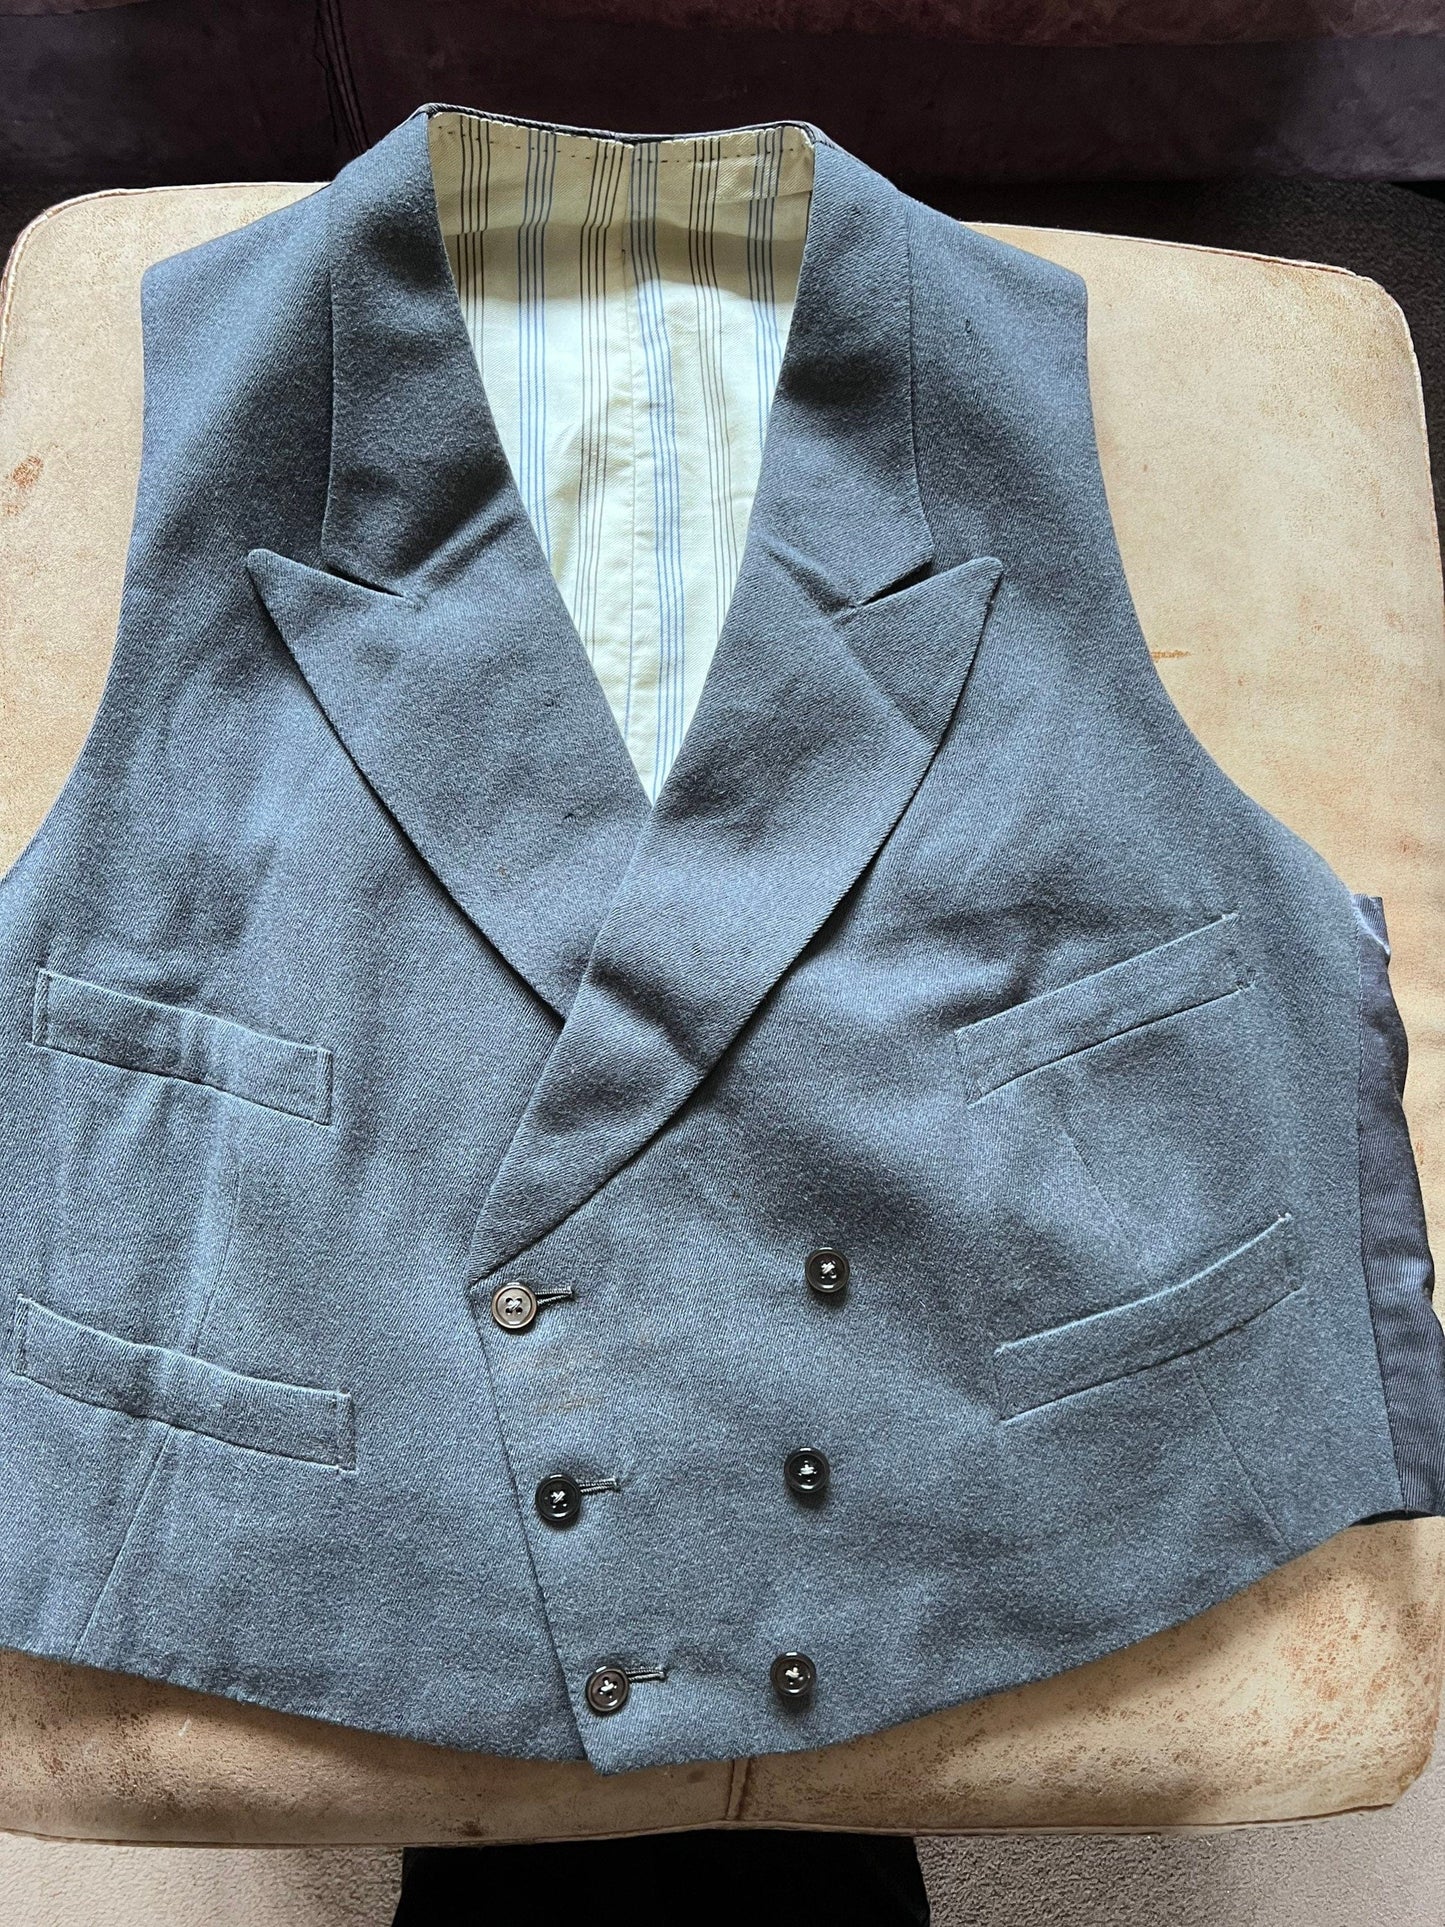 Vintage Double breasted Waistcoat Vest, Airforce Blue Double breasted waistcoat, Bespoke British Made Vintage Waistcoat RAF Blue Waistcoat